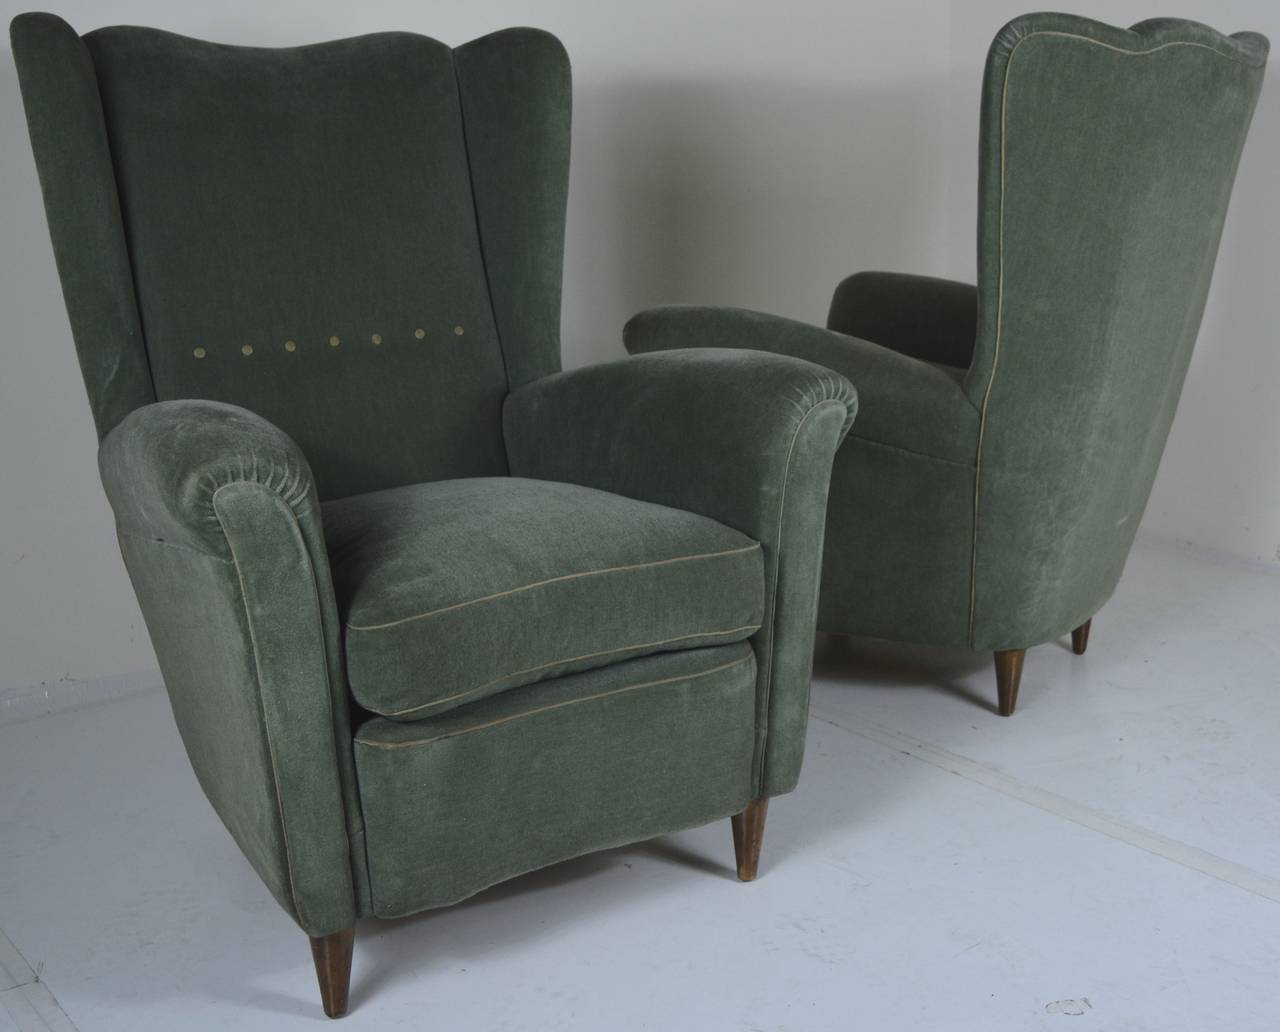 1940s pair of Italian lounge chairs in original olive mohair. Piping and button tufting to back appears to be in a rich silk blend. Down cushions and extravagant high back make for a statement. Subtle details and curves speak to a European old-world